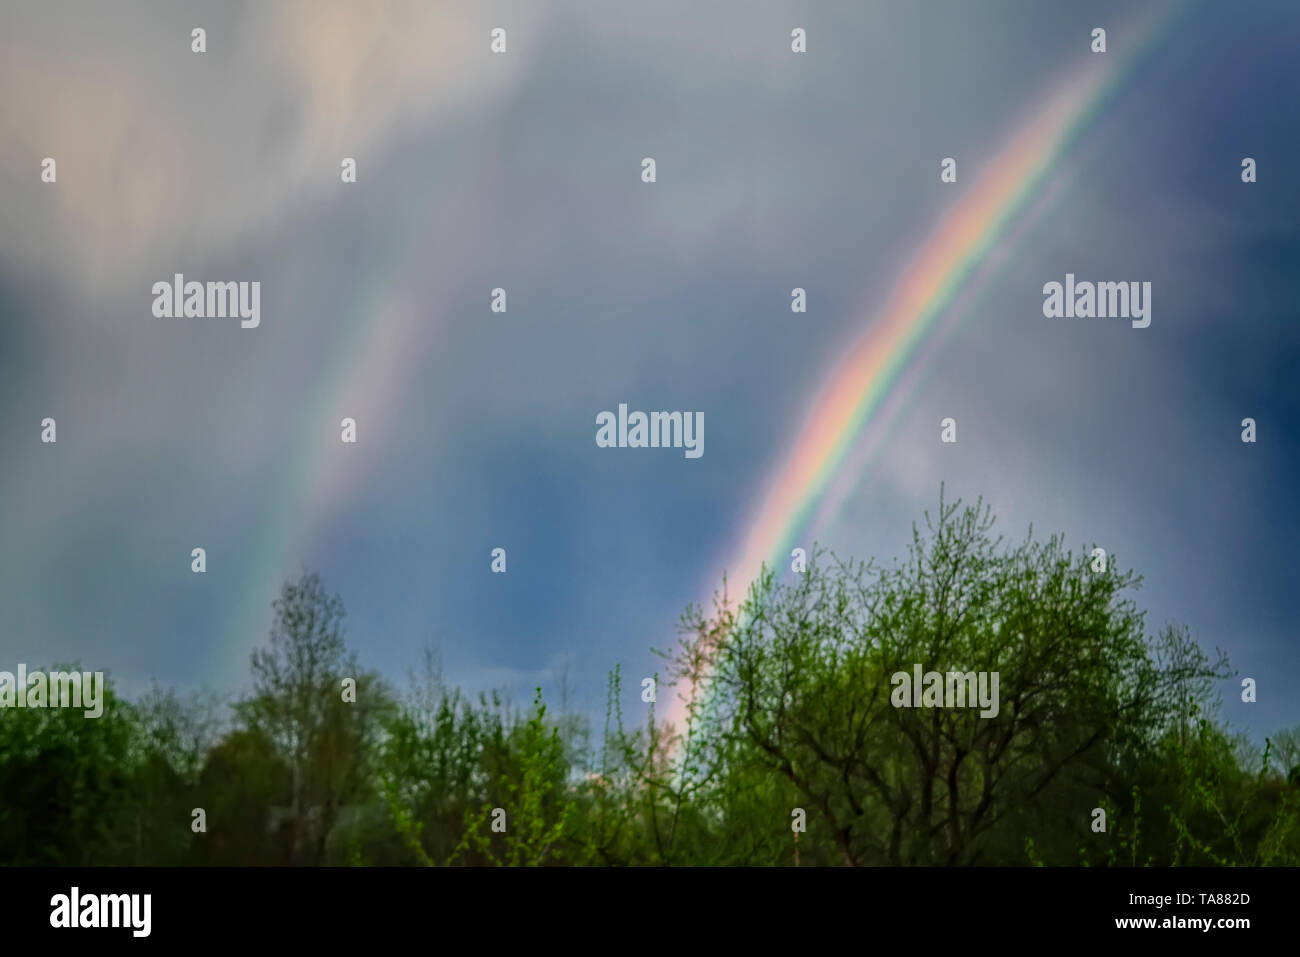 Double rainbow in the sky over the forest. Stock Photo